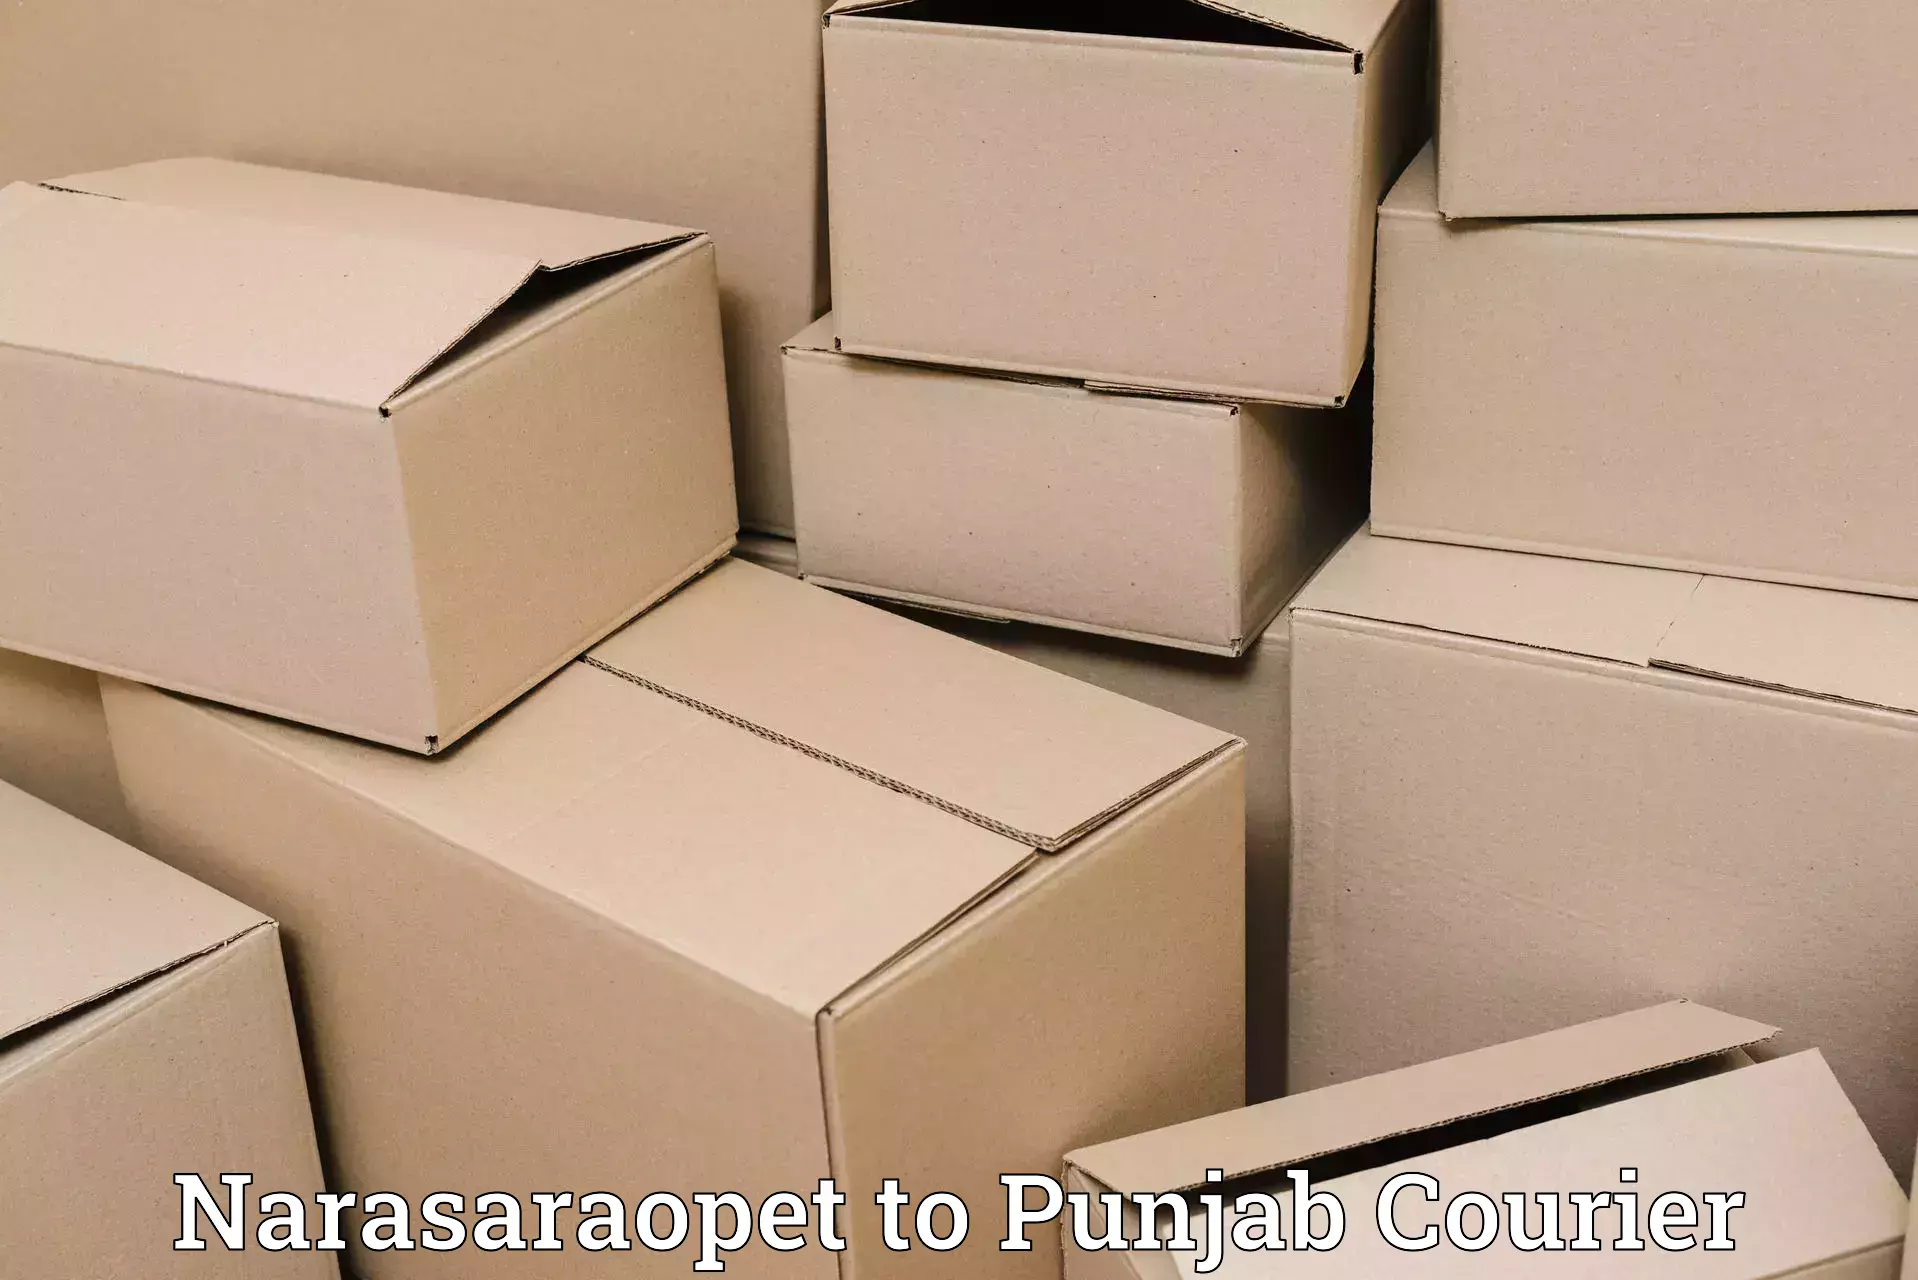 Sustainable delivery practices Narasaraopet to Punjab